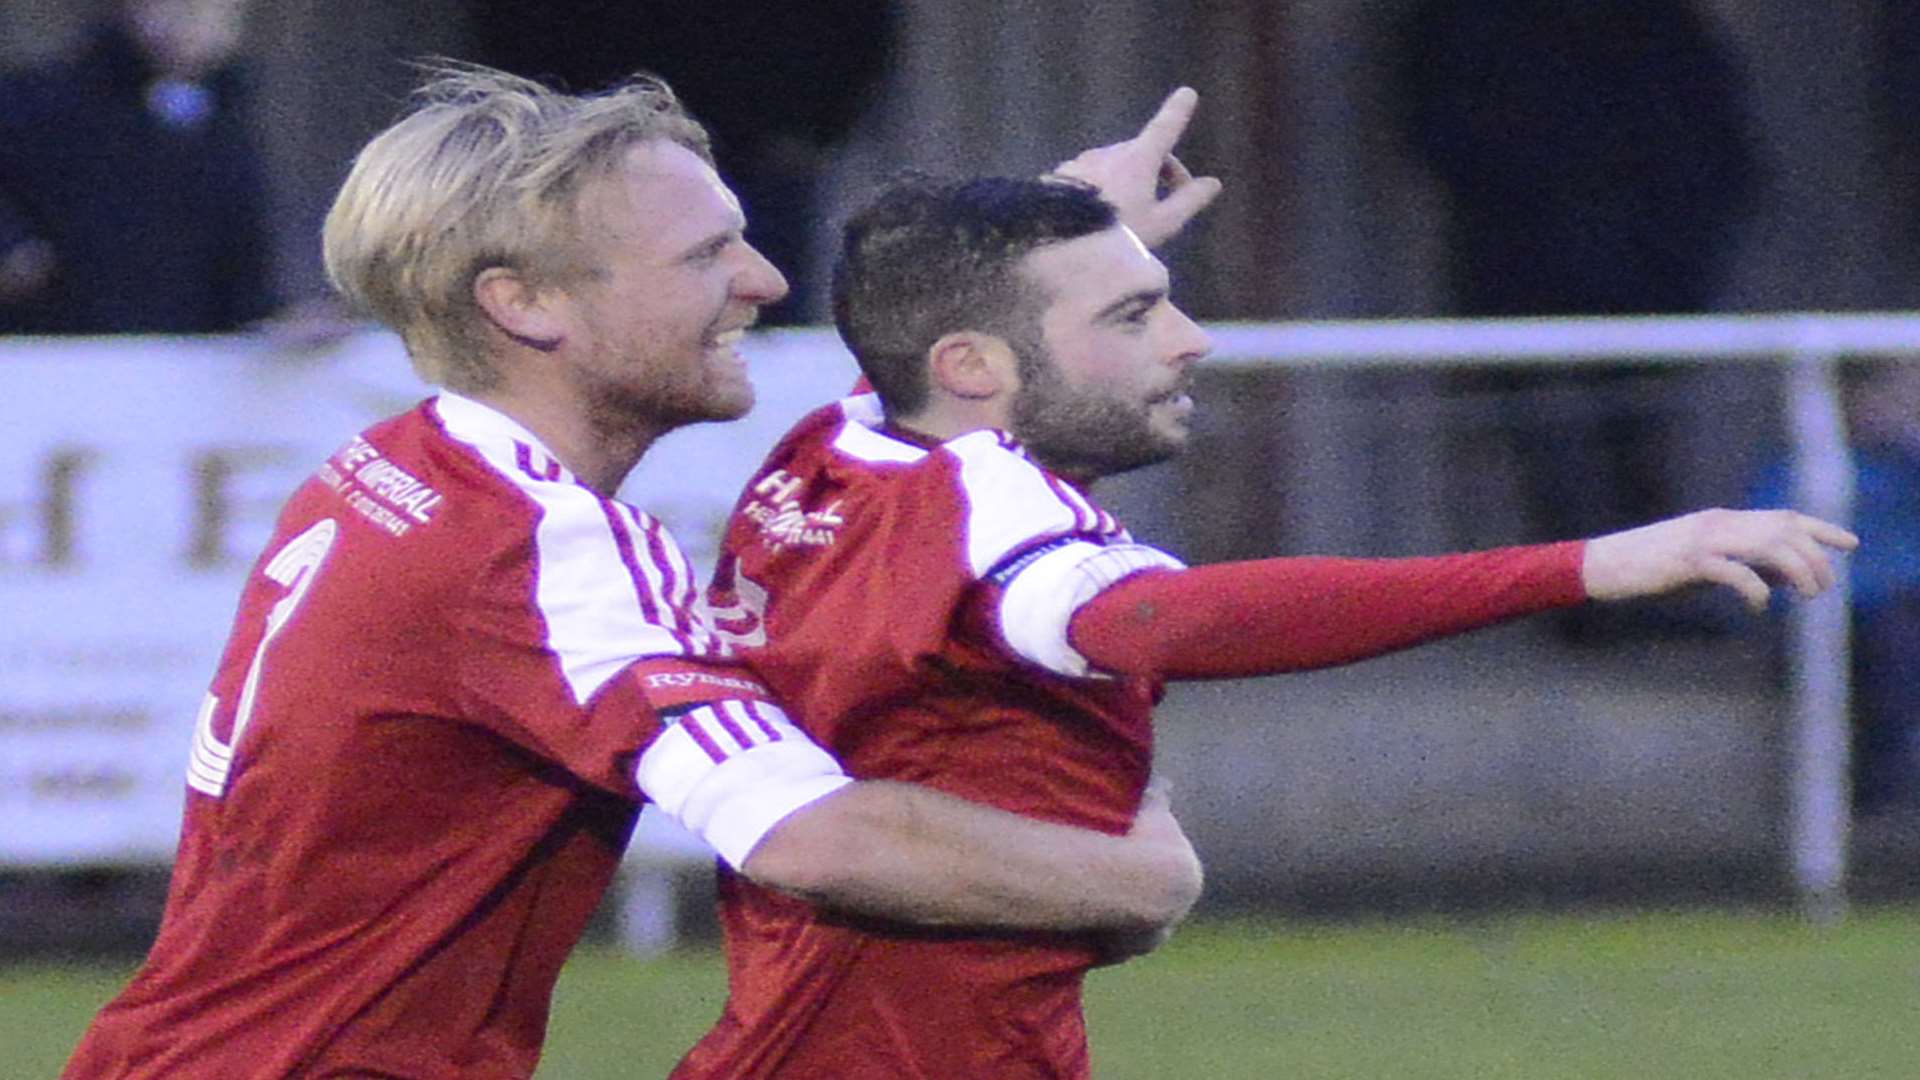 Frankie Sawyer (right) celebrates his first goal in Hythe's 2-0 win over Sittingbourne Picture: Paul Amos